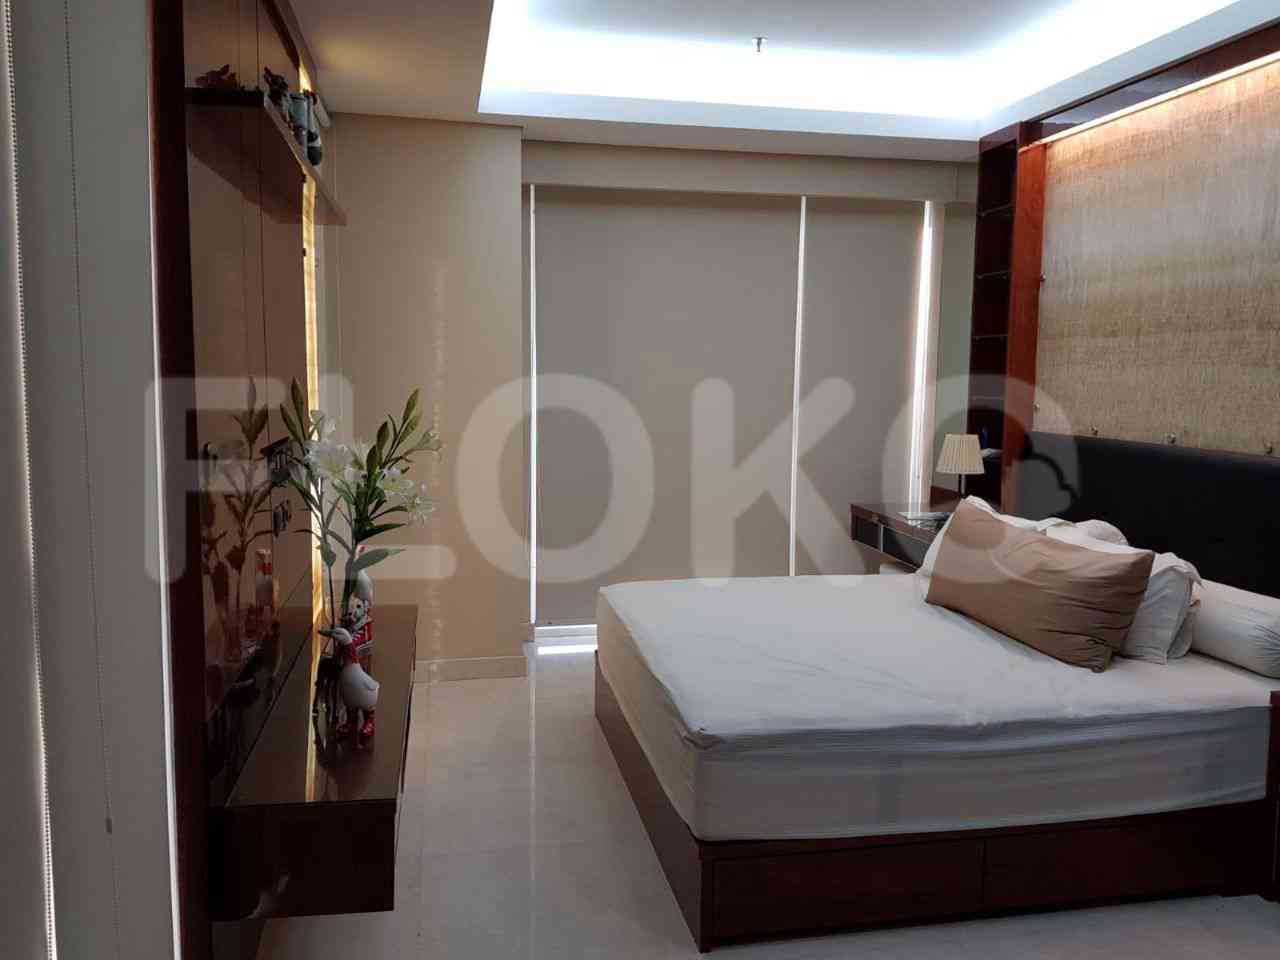 2 Bedroom on 17th Floor for Rent in Pondok Indah Residence - fpo7a5 1